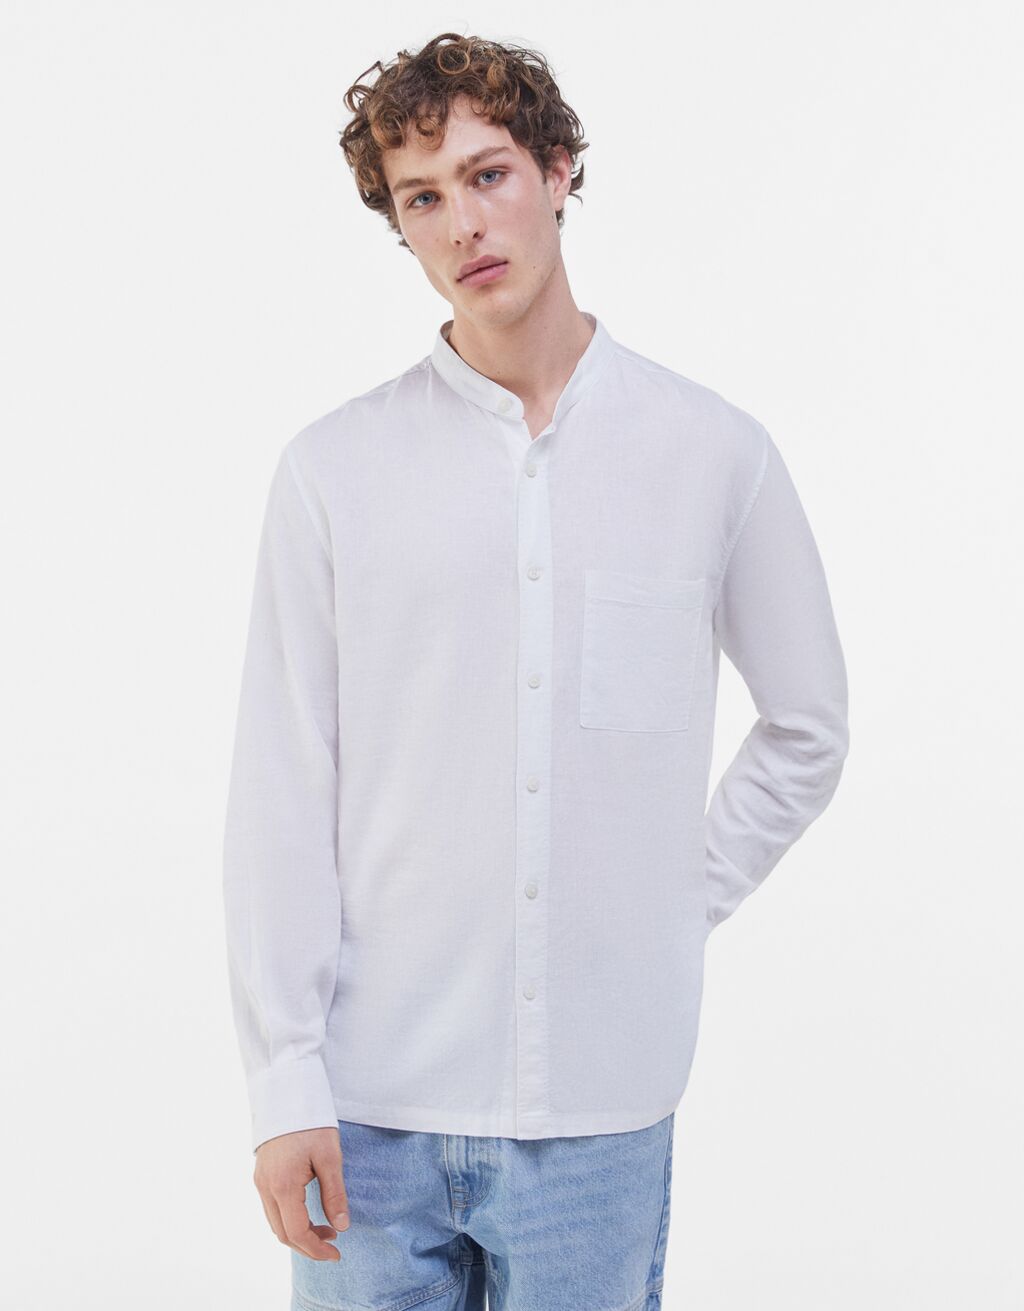 Linen shirt with stand-up collar - Piotnet Grid